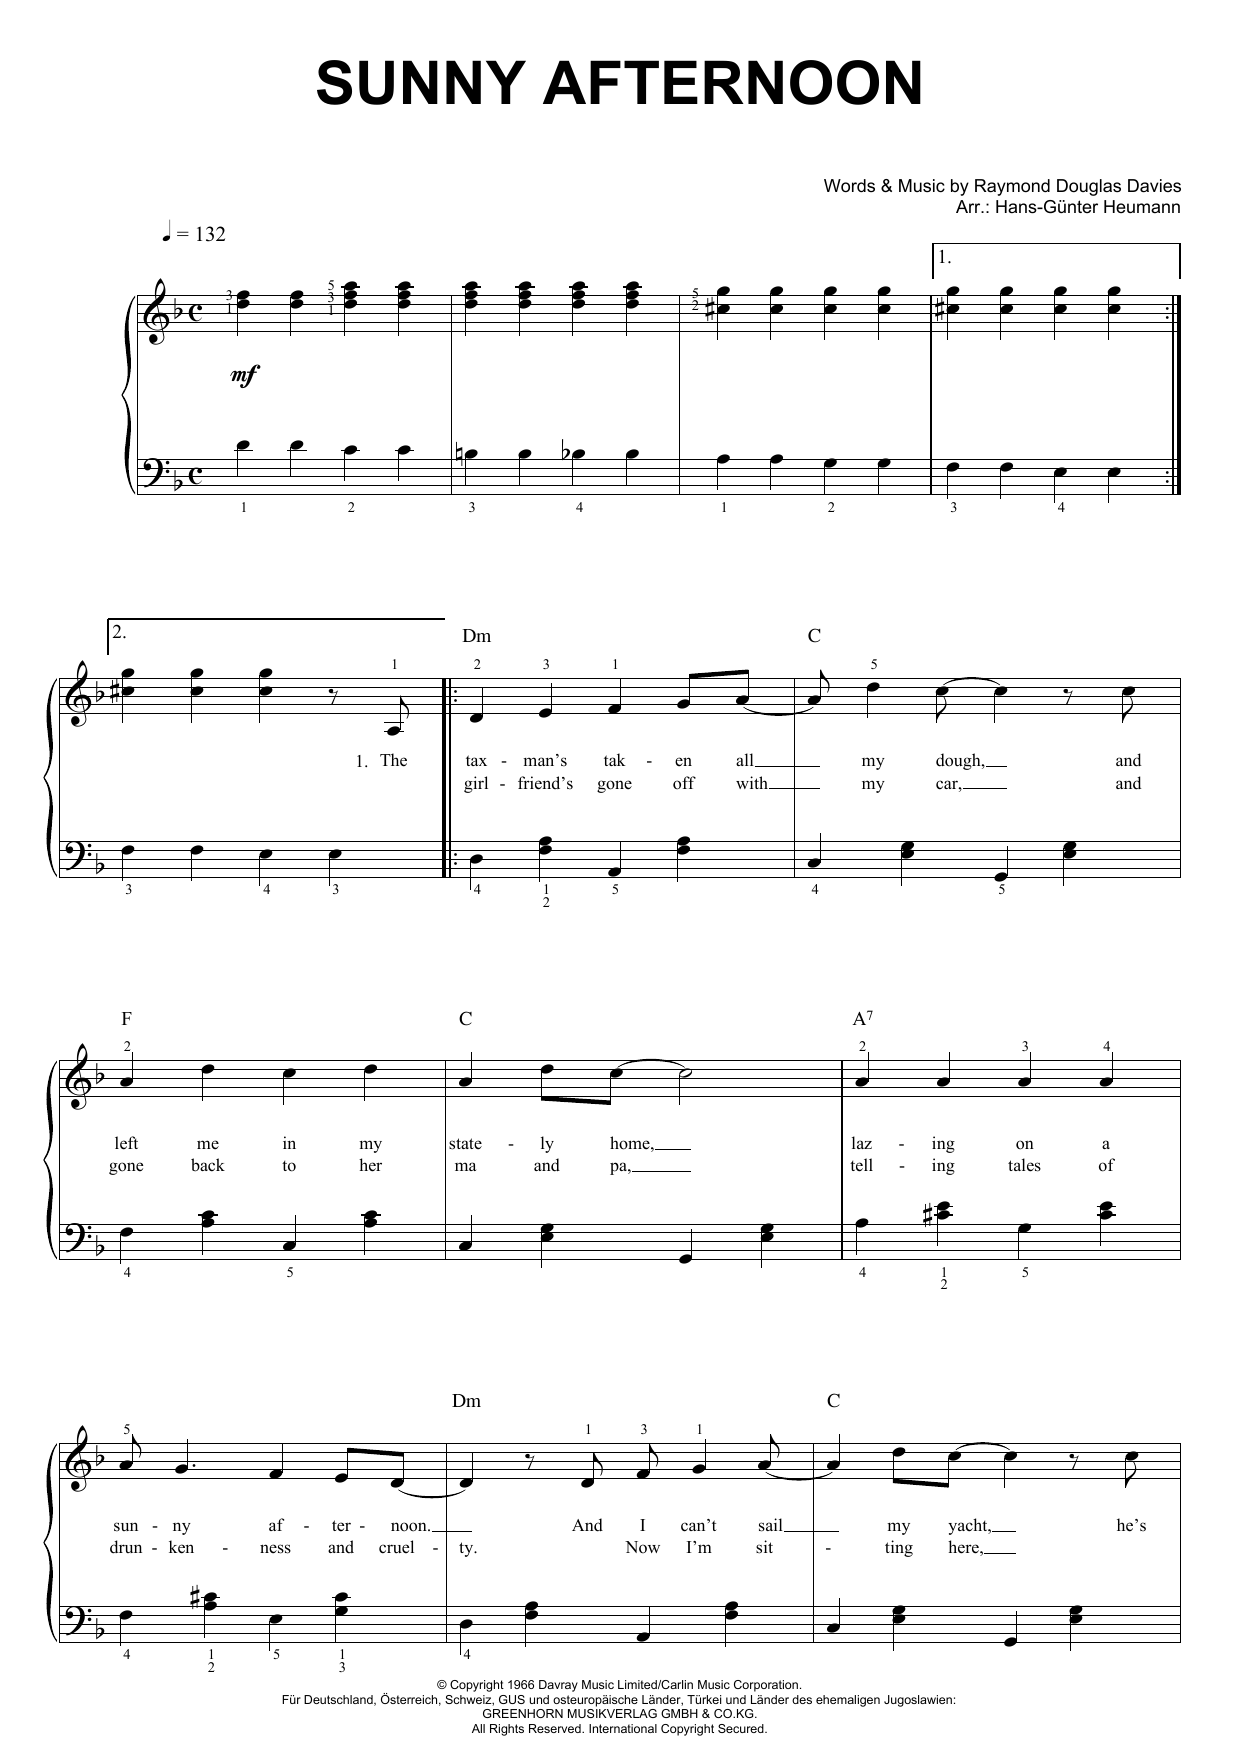 Download The Kinks Sunny Afternoon Sheet Music